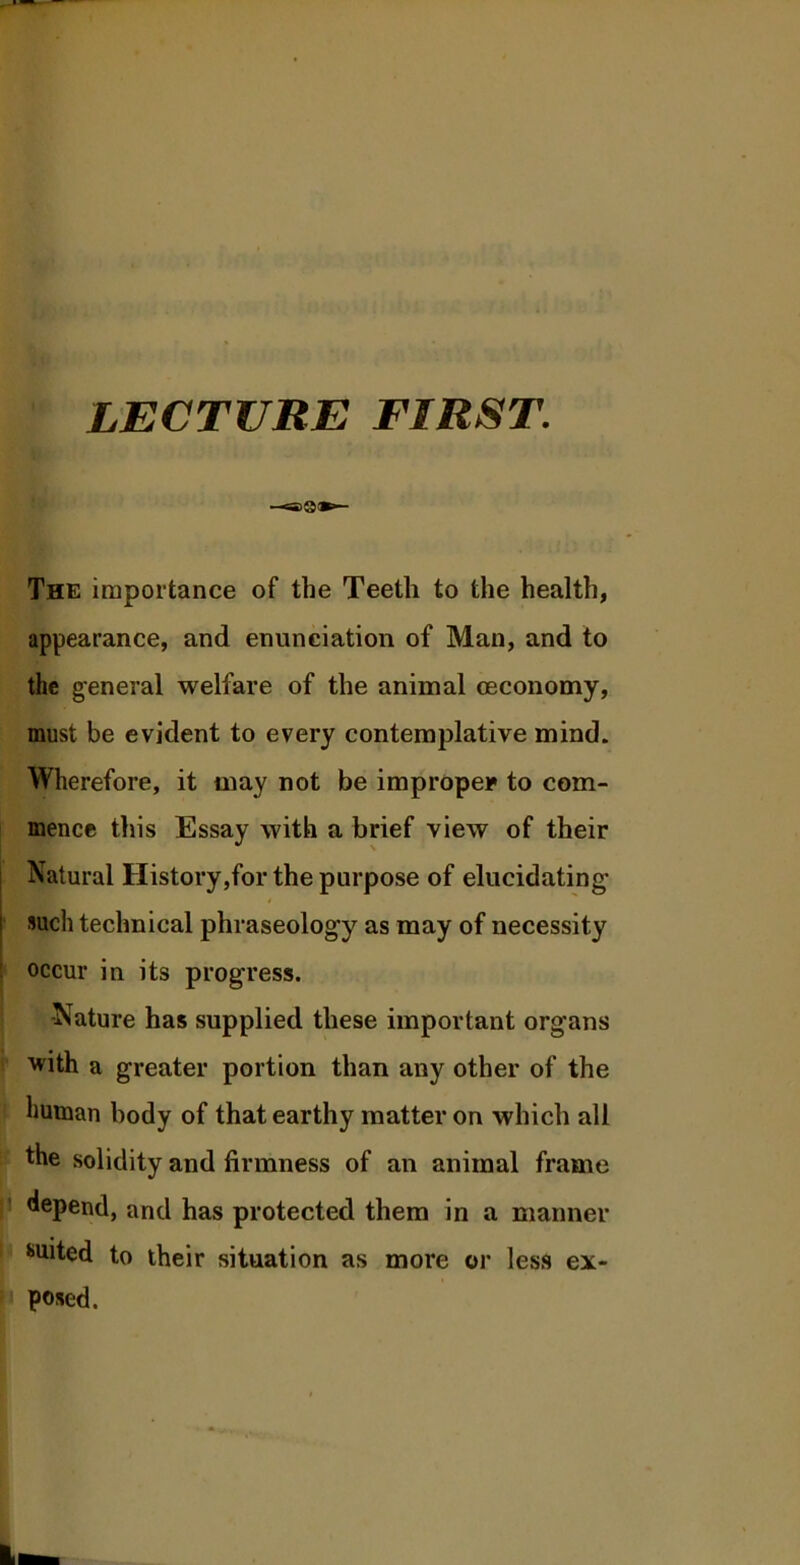 LECTURE FIRST. ©a The importance of the Teeth to the health, appearance, and enunciation of Man, and to the general welfare of the animal ceconomy, must be evident to every contemplative mind. Wherefore, it may not be improper to com- mence this Essay with a brief view of their Natural History,for the purpose of elucidating' i such technical phraseology as may of necessity occur in its progress. ■Nature has supplied these important organs with a greater portion than any other of the human body of that earthy matter on which all the solidity and firmness of an animal frame depend, and has protected them in a manner suited to their situation as more or less ex- posed.